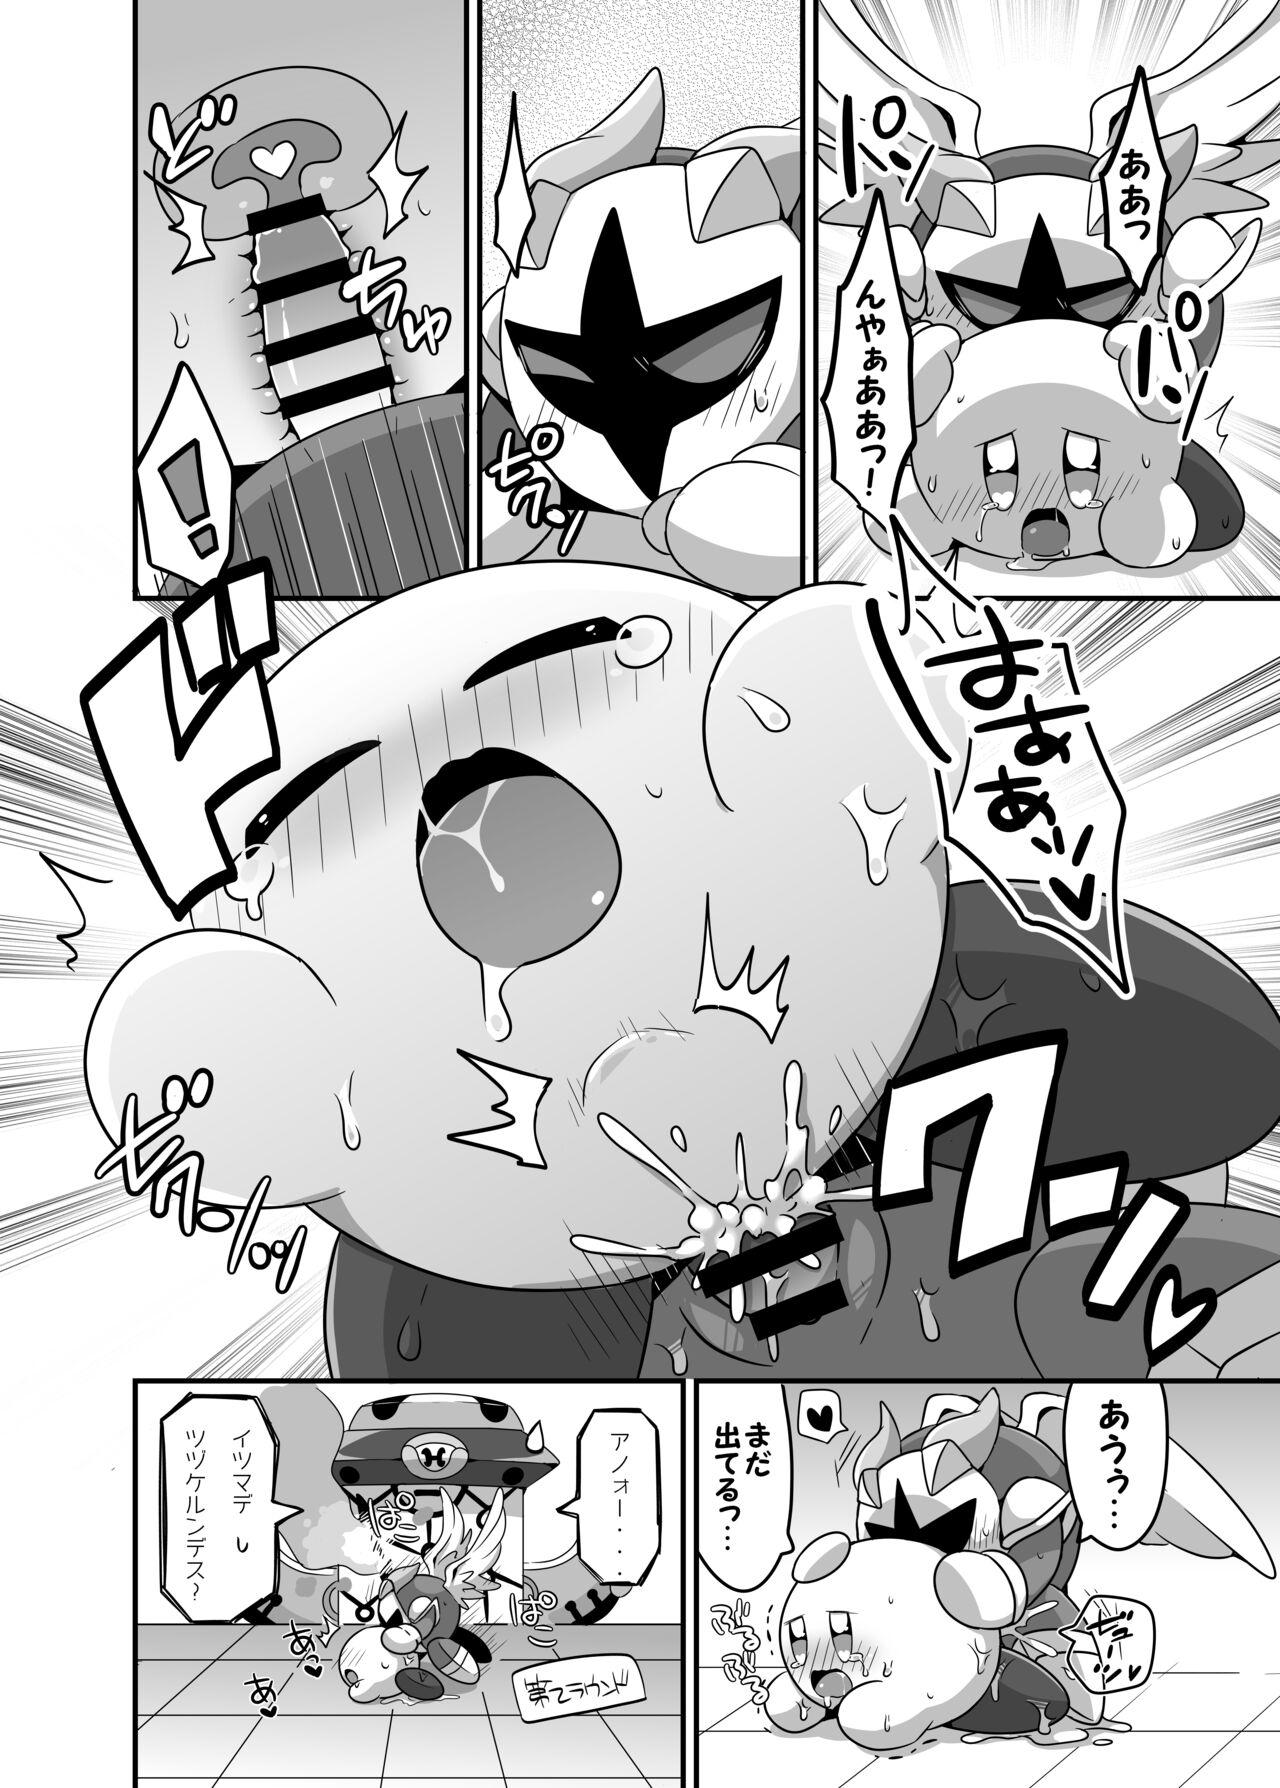 Spit I Want to Do XXX Even For Spheres! - Kirby Scissoring - Page 6